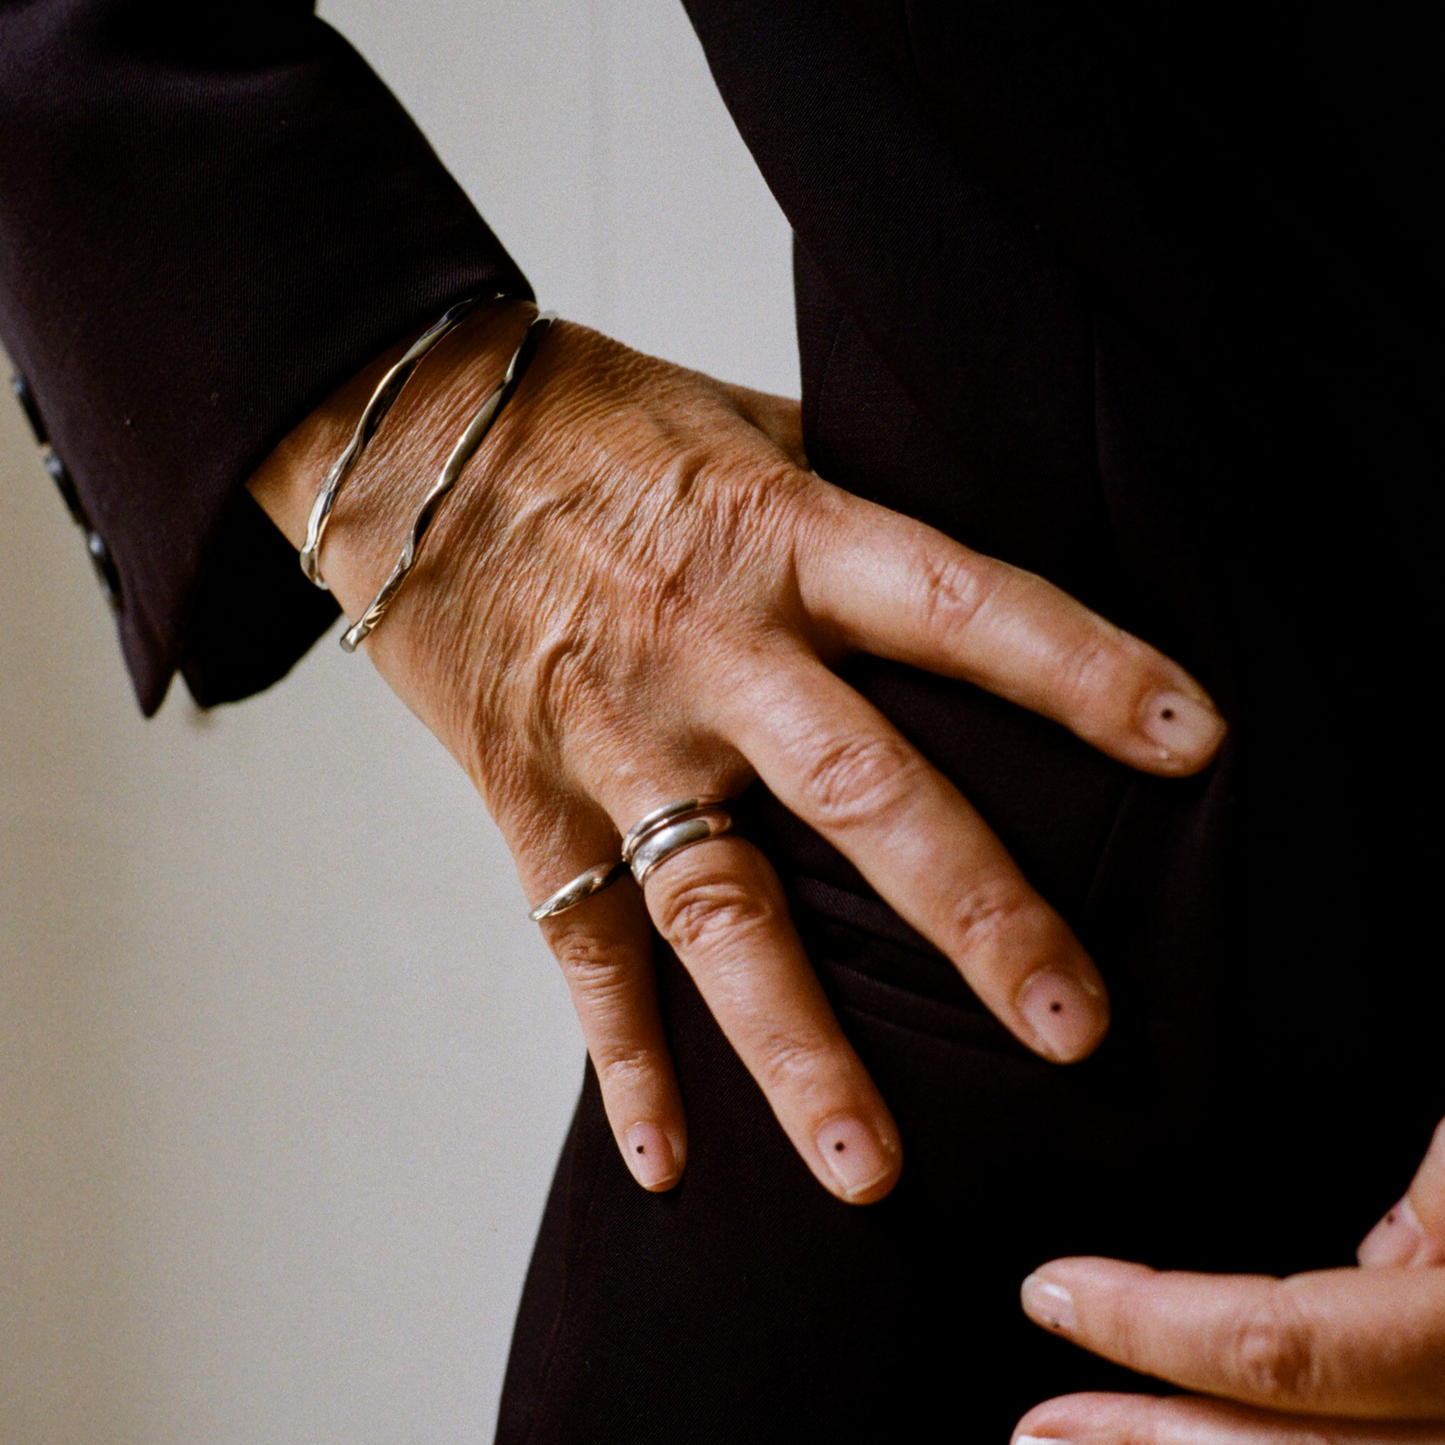 A hand with a silver ring on the ring finger and a silver ring on the pinkie. The wrist has two uneven silver cuff bands. The hand is sitting on the hip, and there are small black dots on the nails.